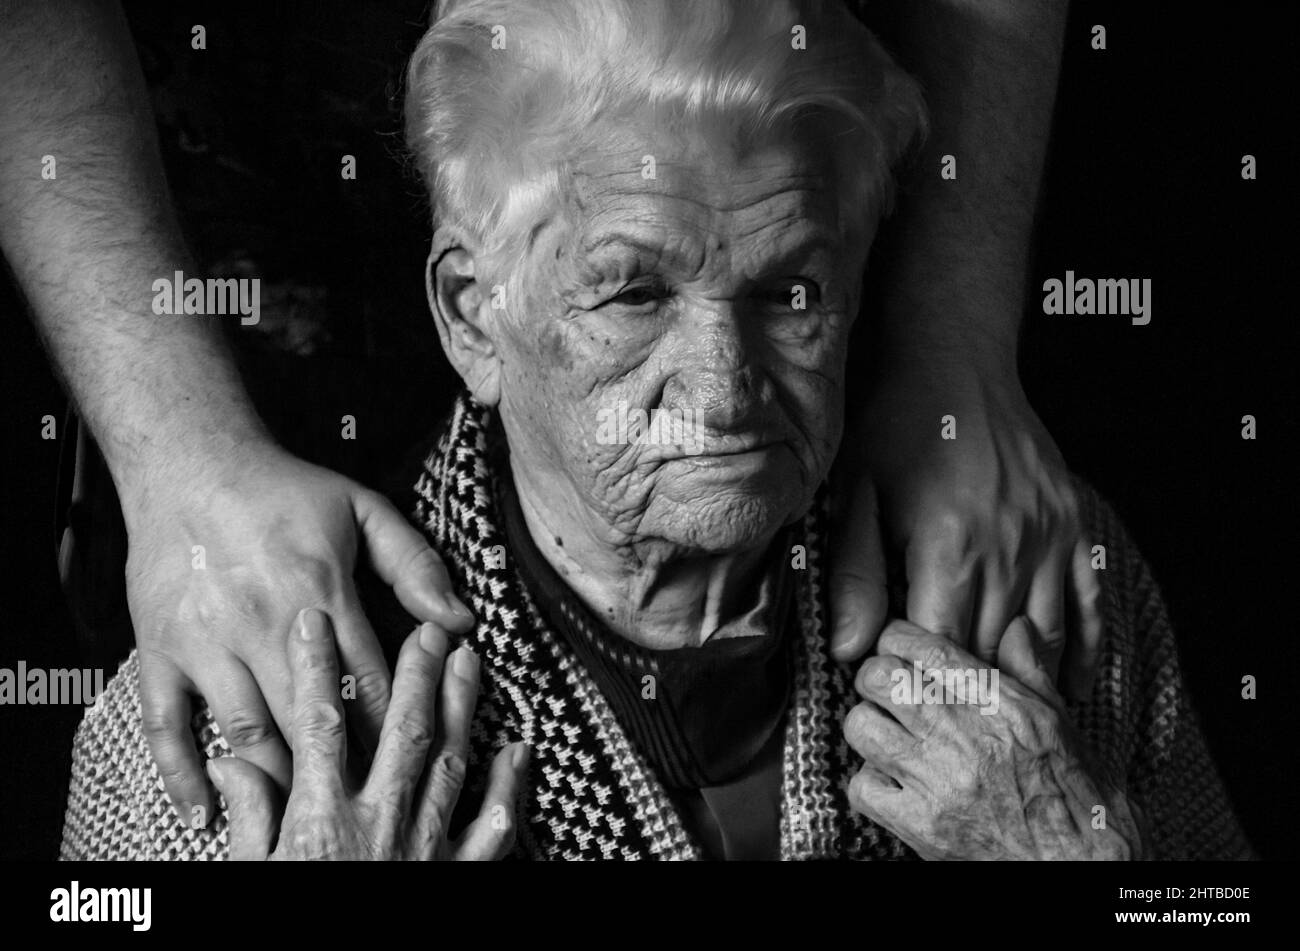 Hands of an elderly woman against black background. black and white photo. Stock Photo